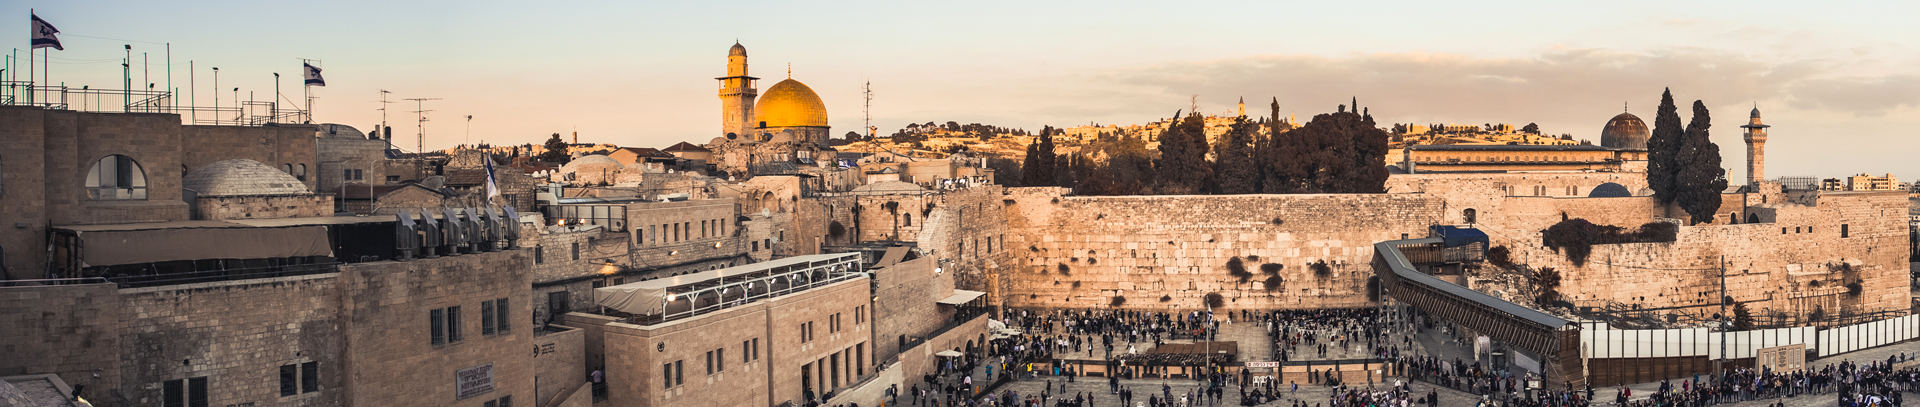 Evangelist Group Tours to Israel - Western Wall